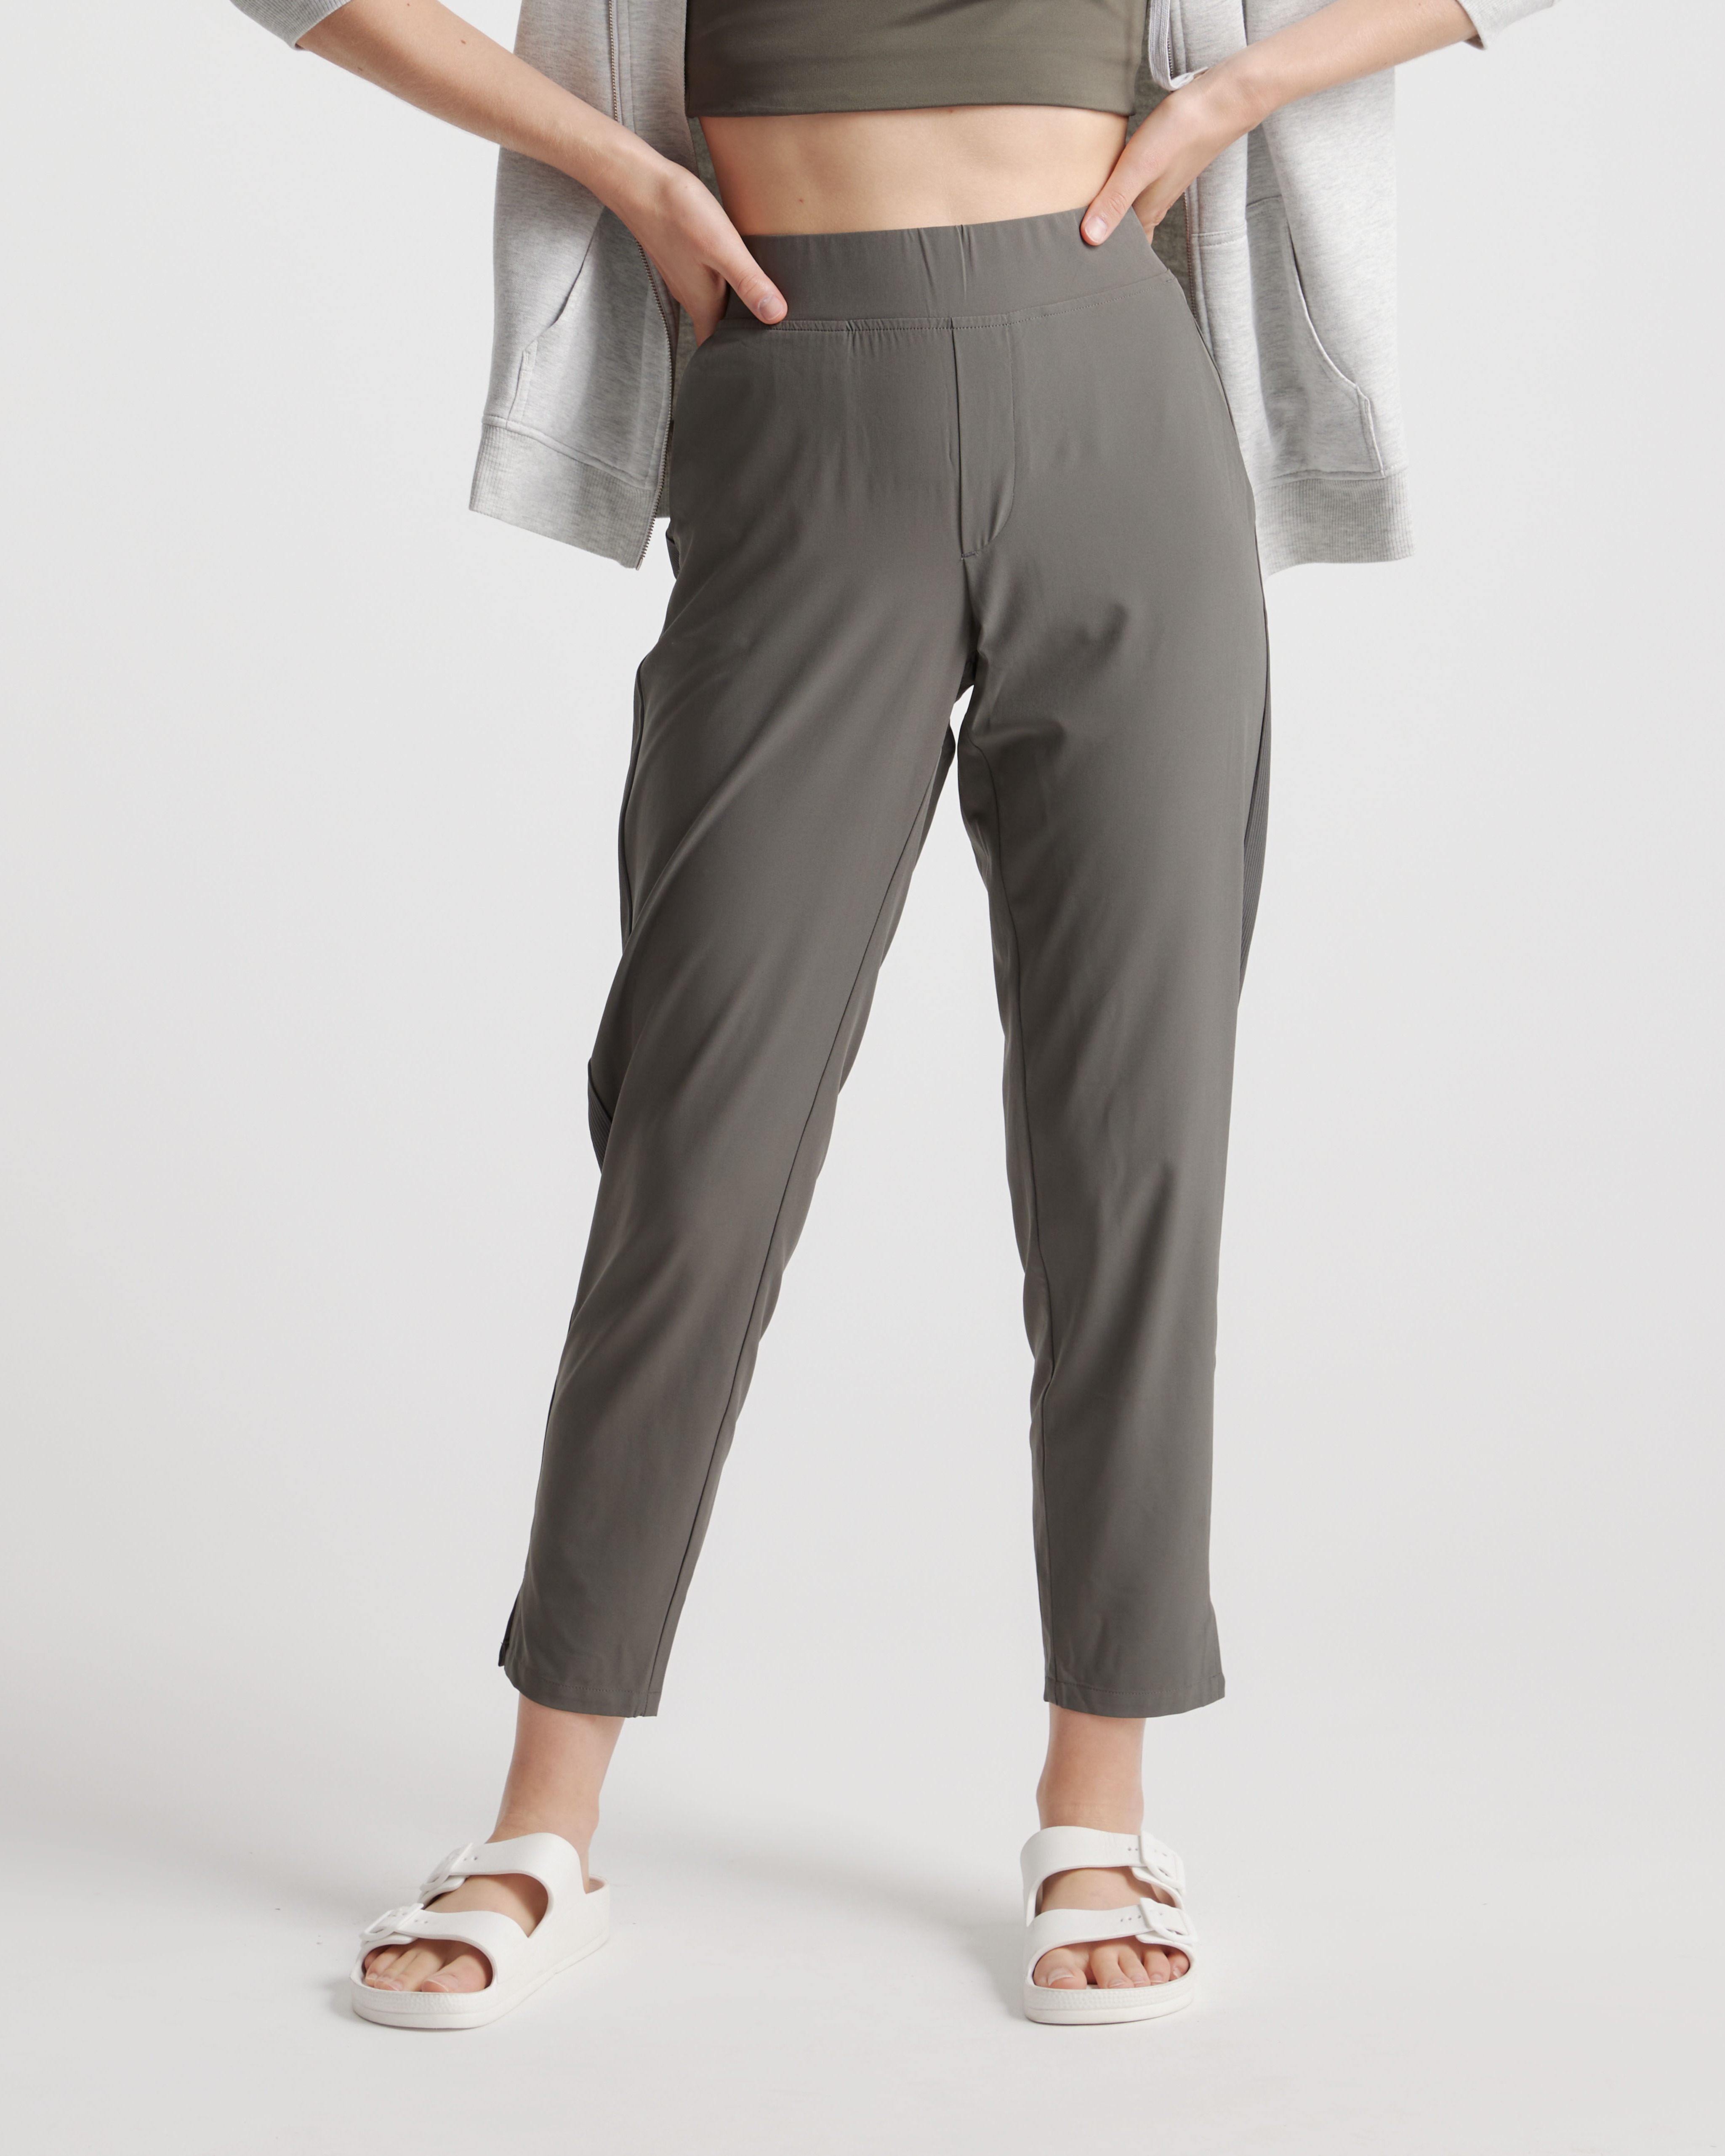 Cuffed Ankle Pants Style 232156